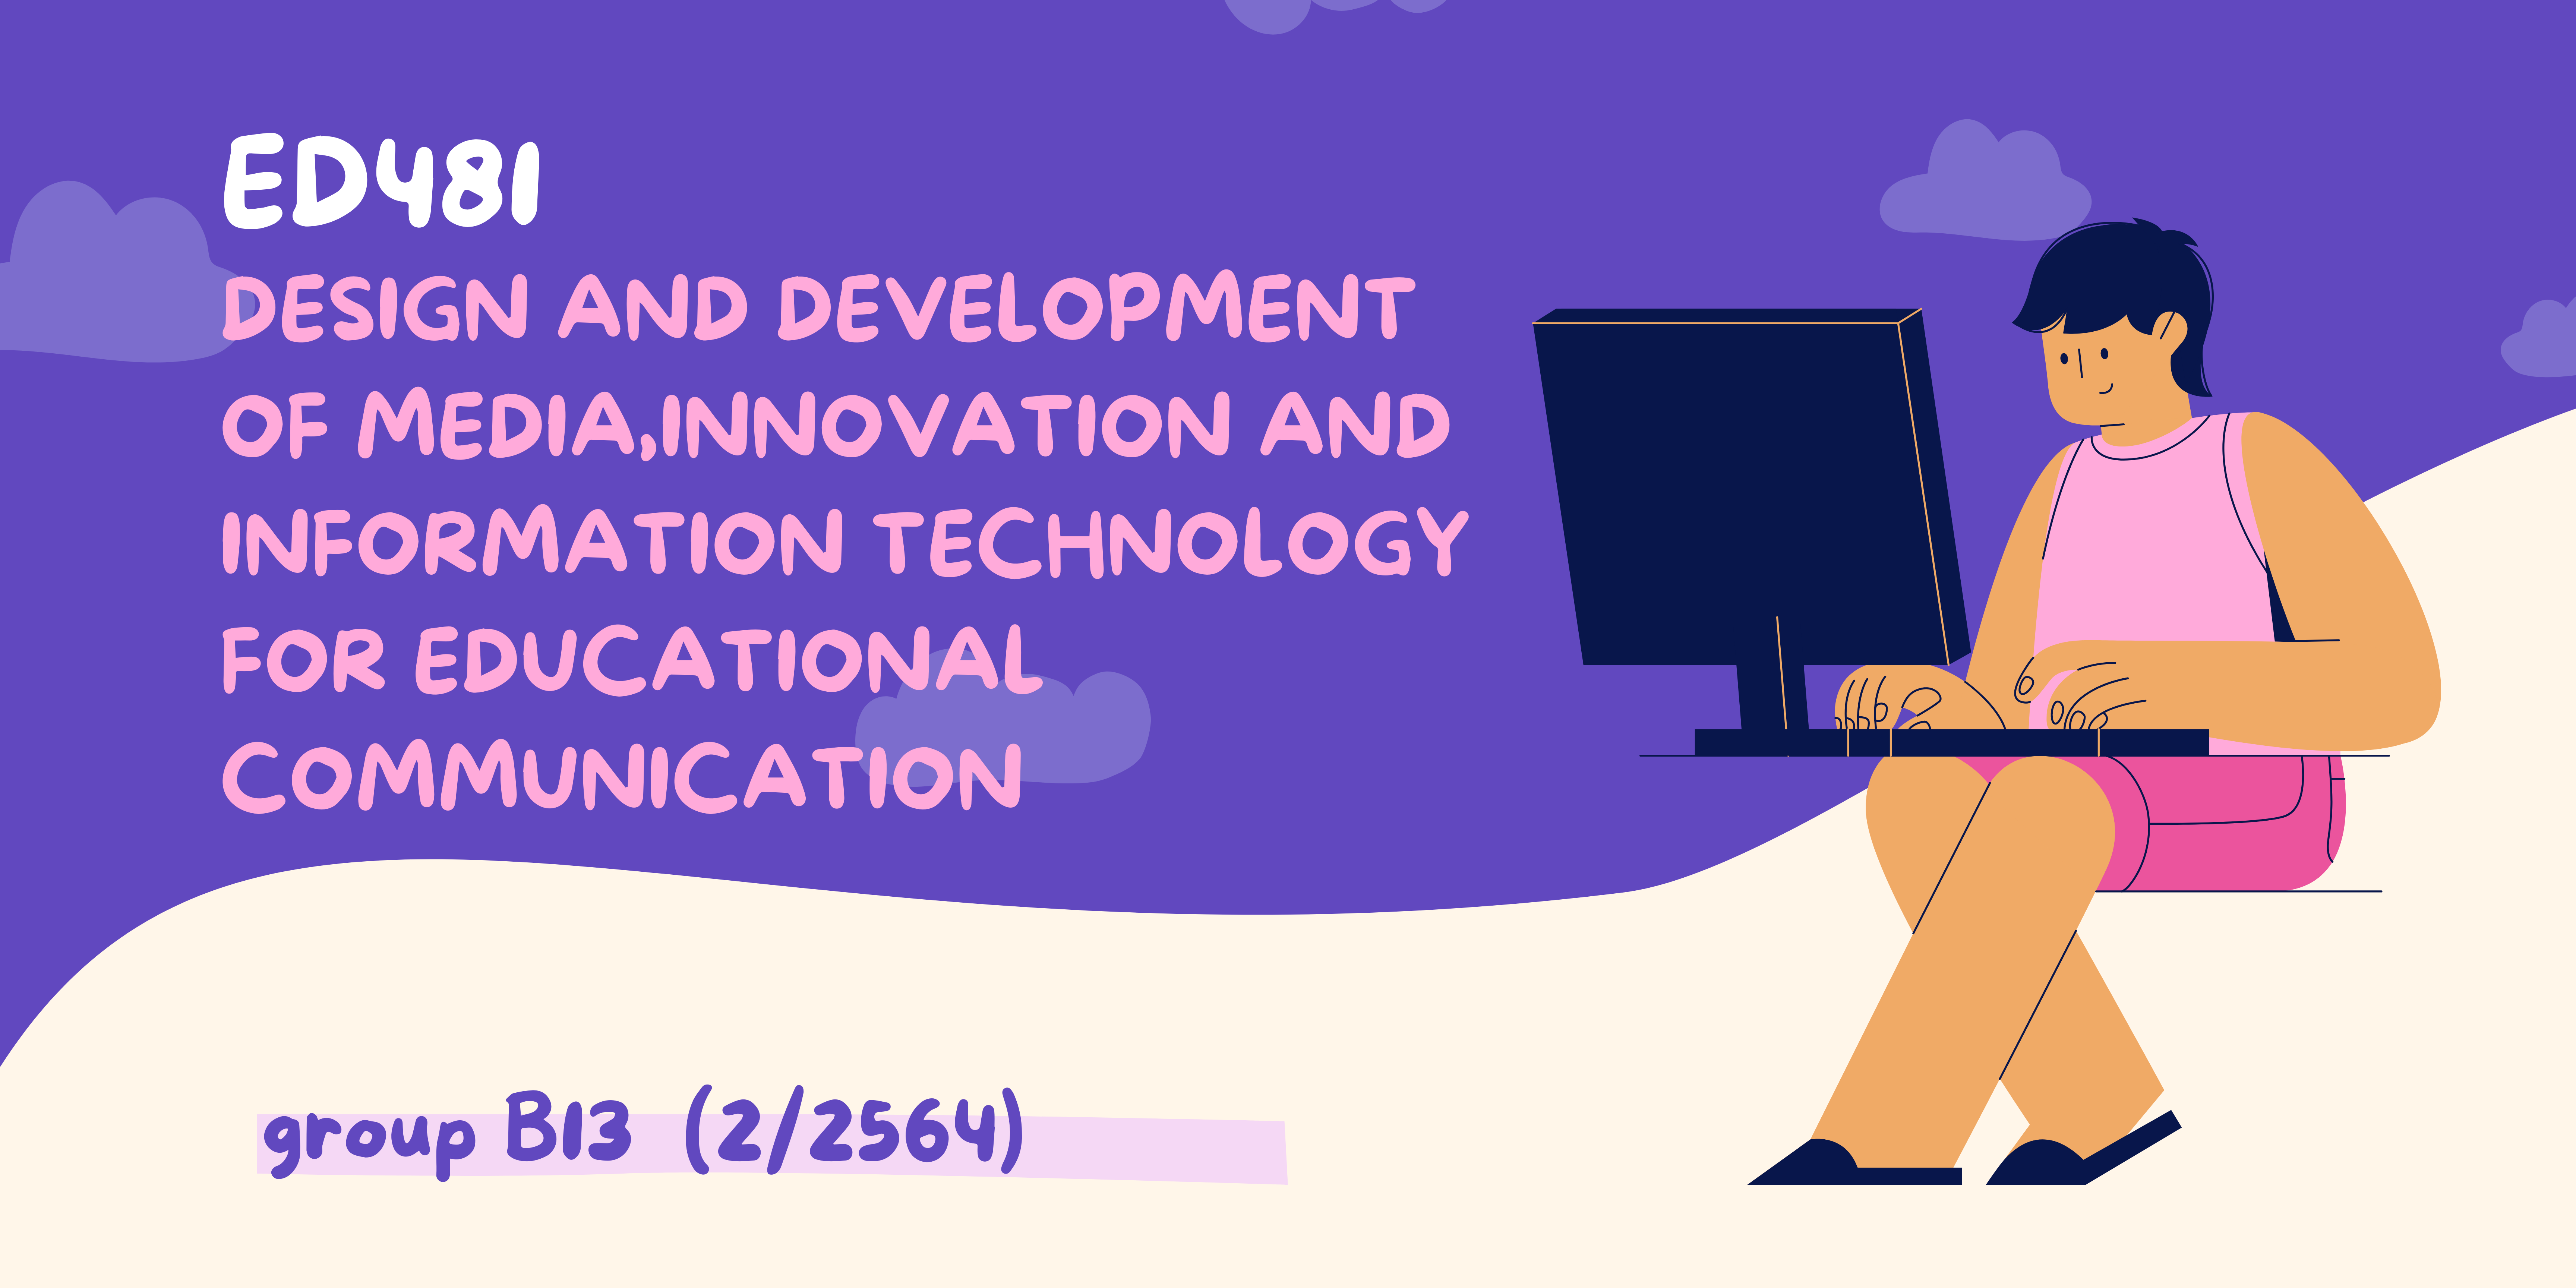 ED481 DESIGN AND DEVELOPMENT OF MEDIA,INNOVATION AND INFORMATION TECHNOLOGY FOR EDUCATIONAL COMMUNICATION 